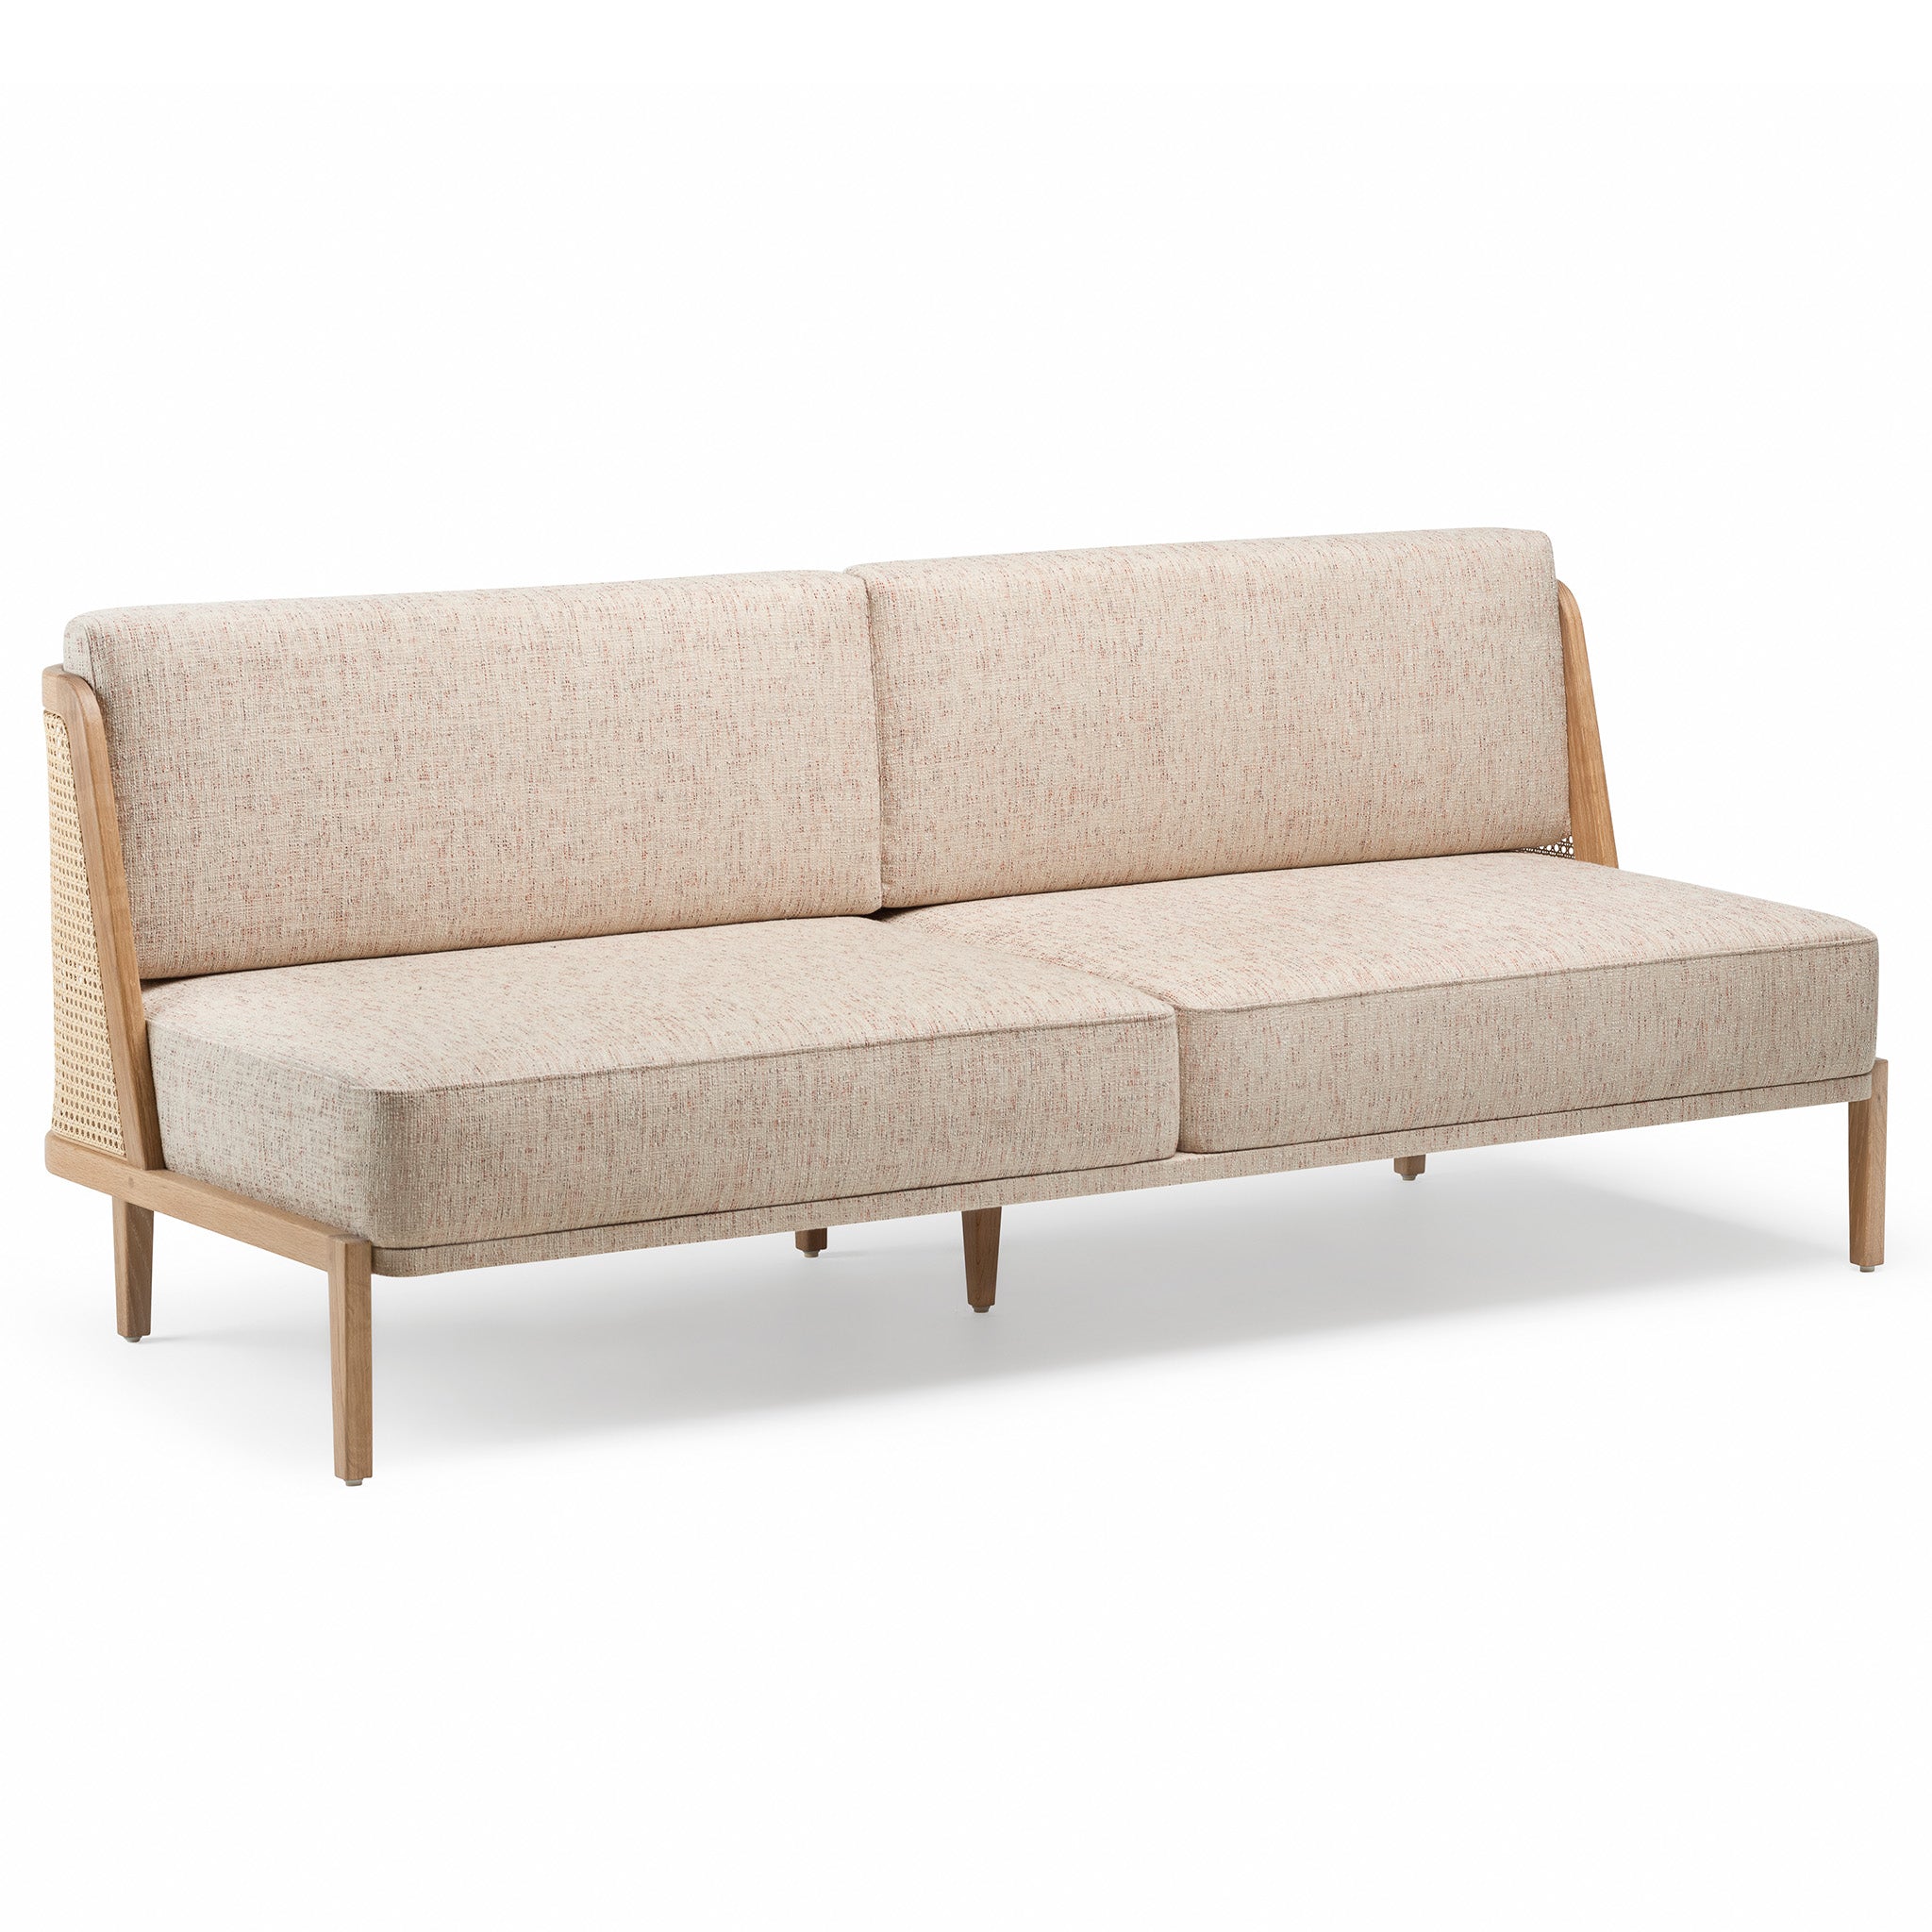 Throne Sofa With Rattan By Autoban